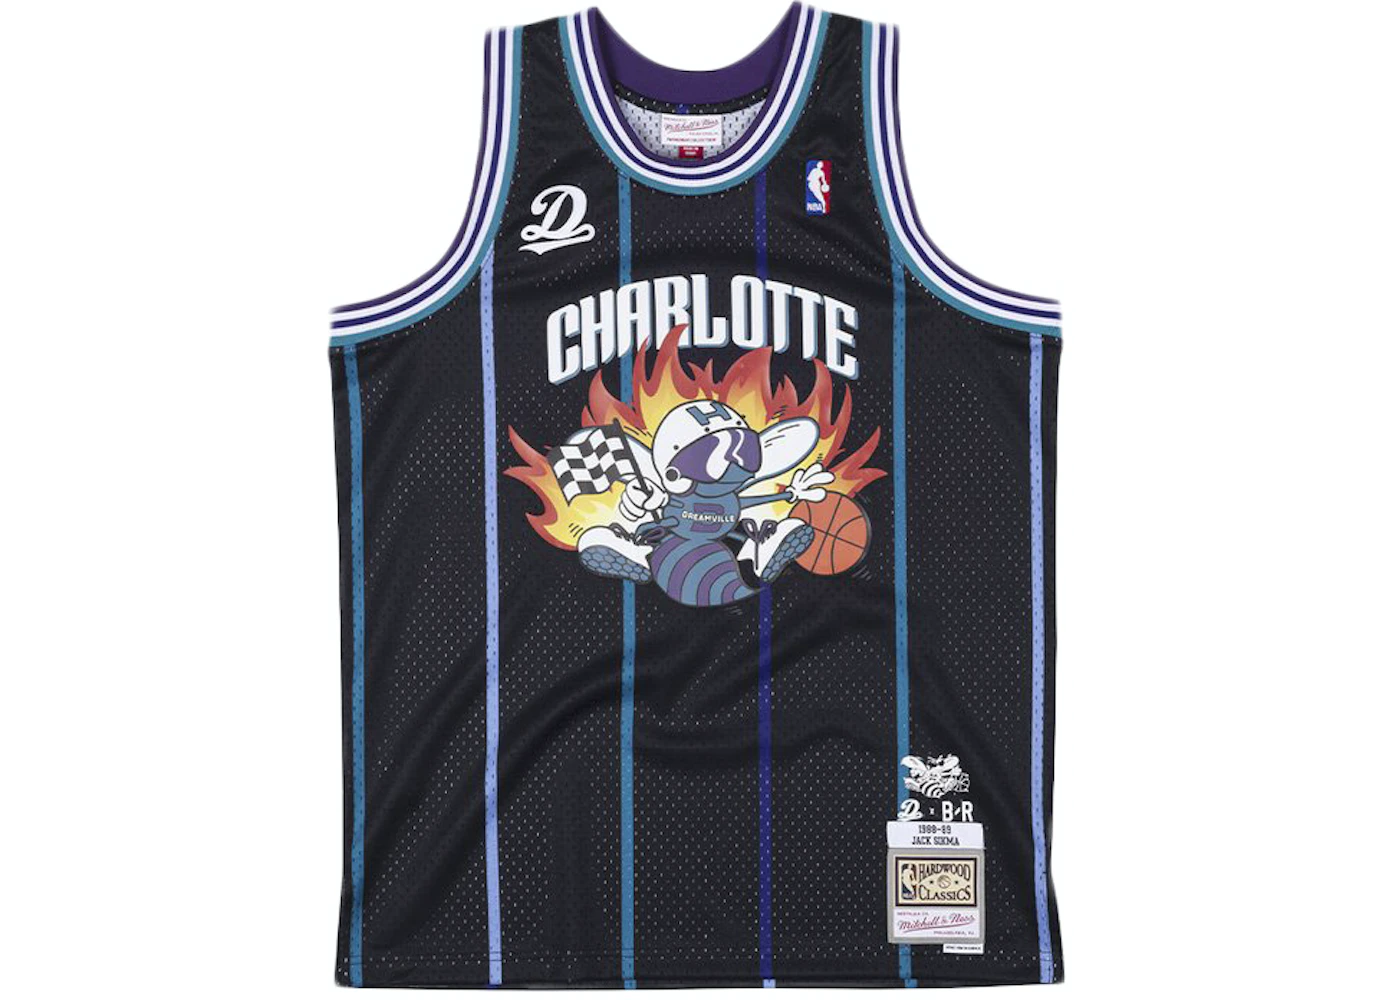 charlotte hornets mitchell and ness shirt